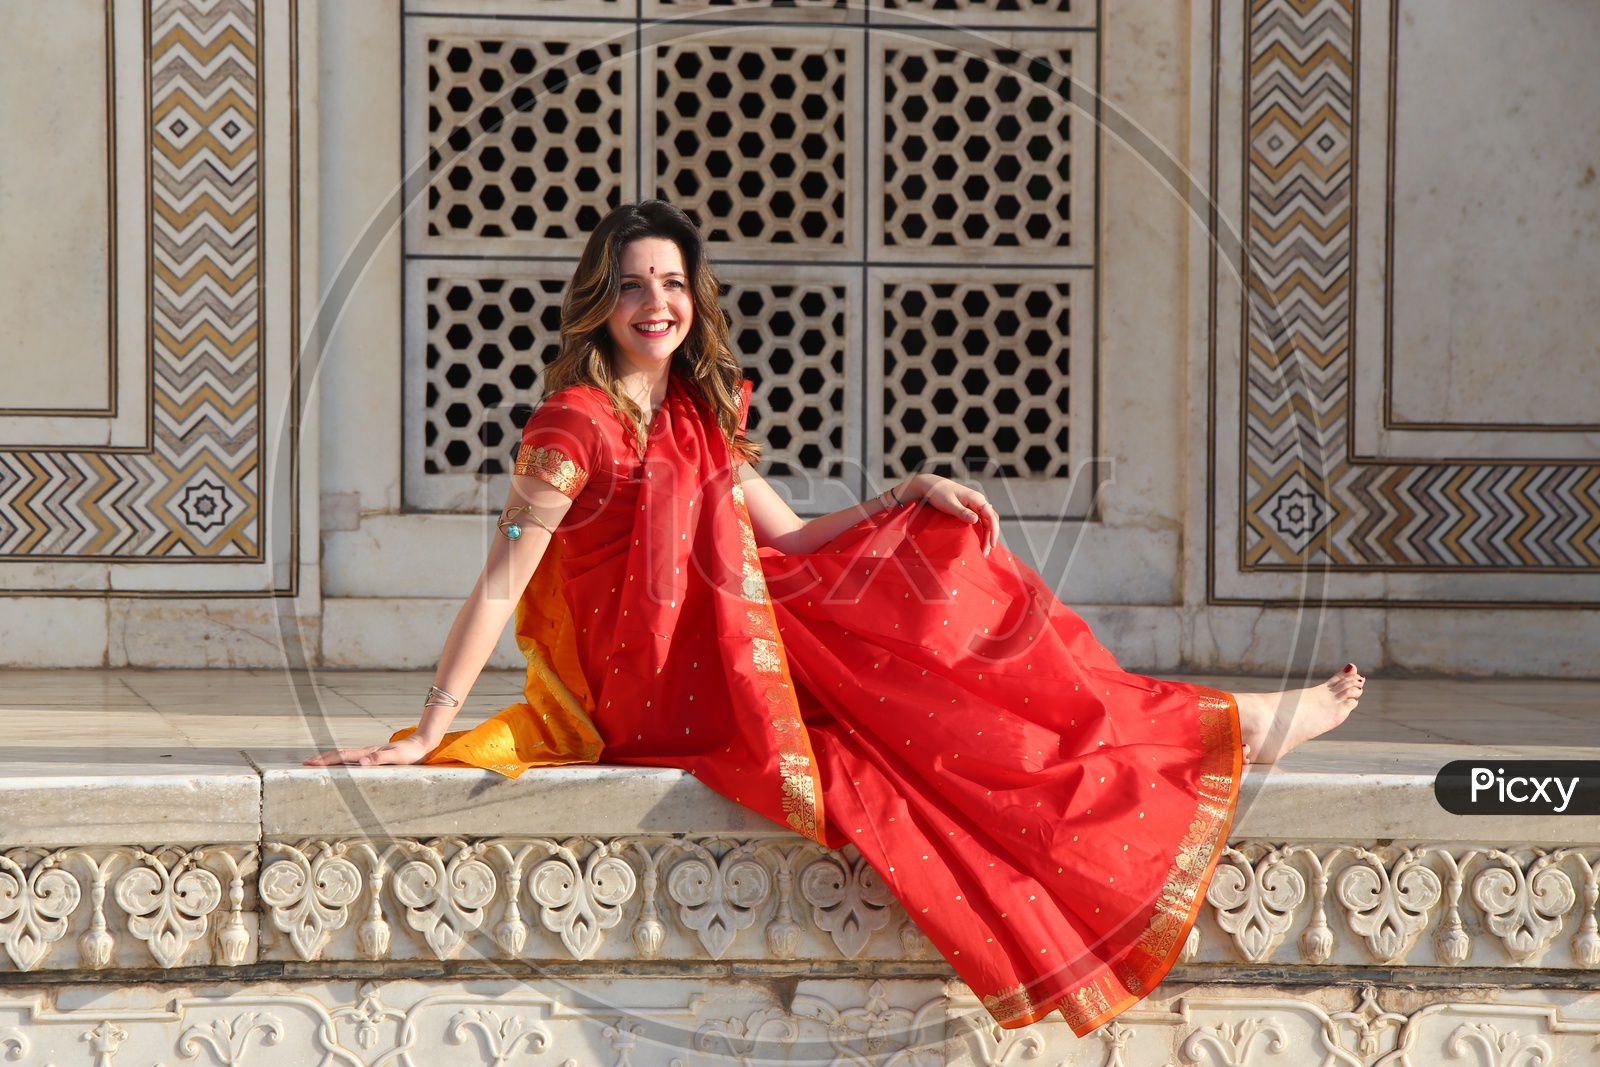 A Foreigner Lady In Traditional Indian Attire at Taj Mahal